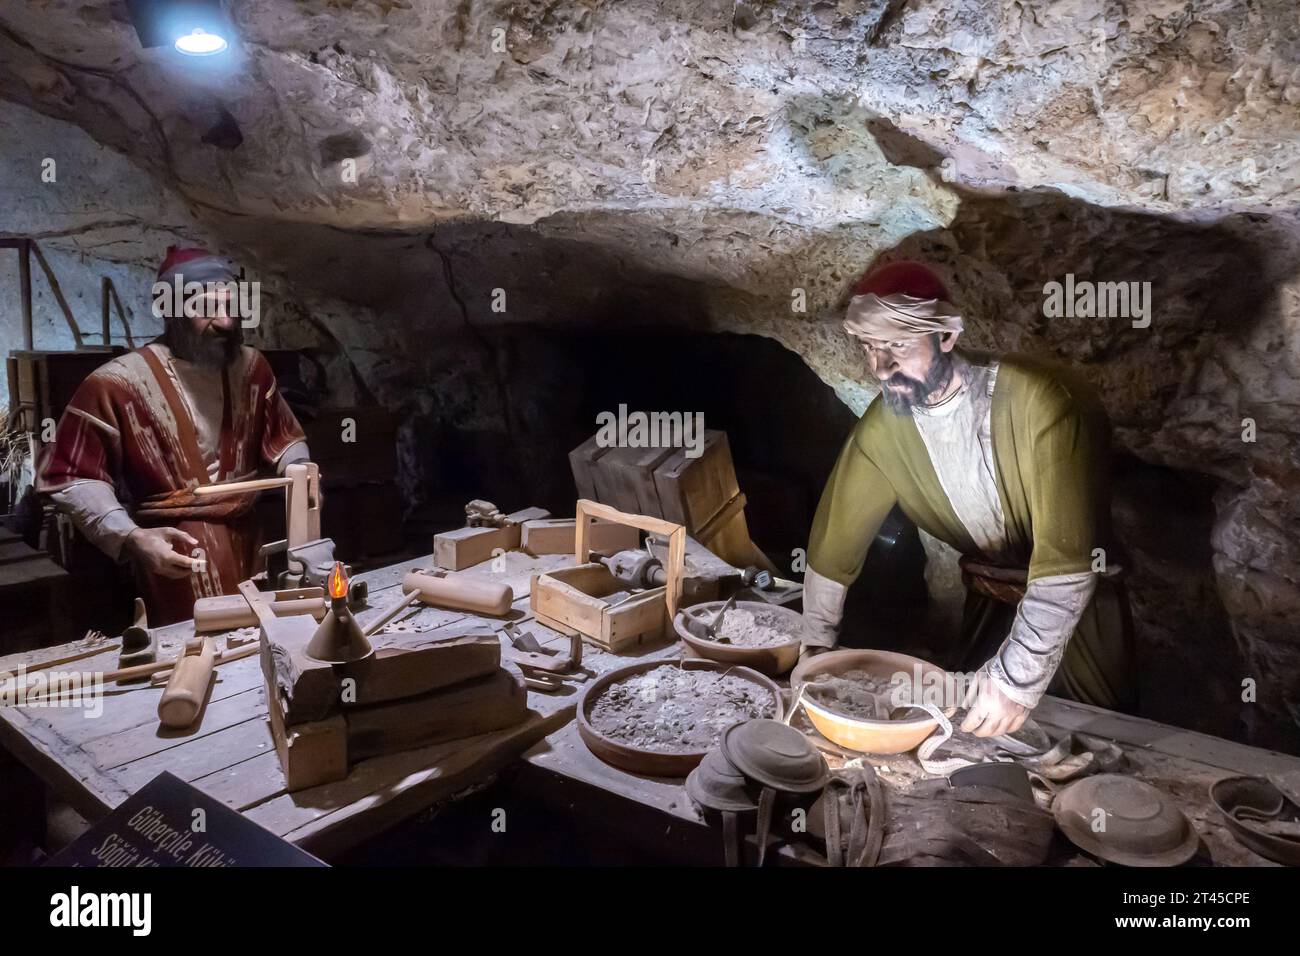 Installation depicting production of gunpowder from salt and sulfur in historic antep Gaziantep Turkey Stock Photo